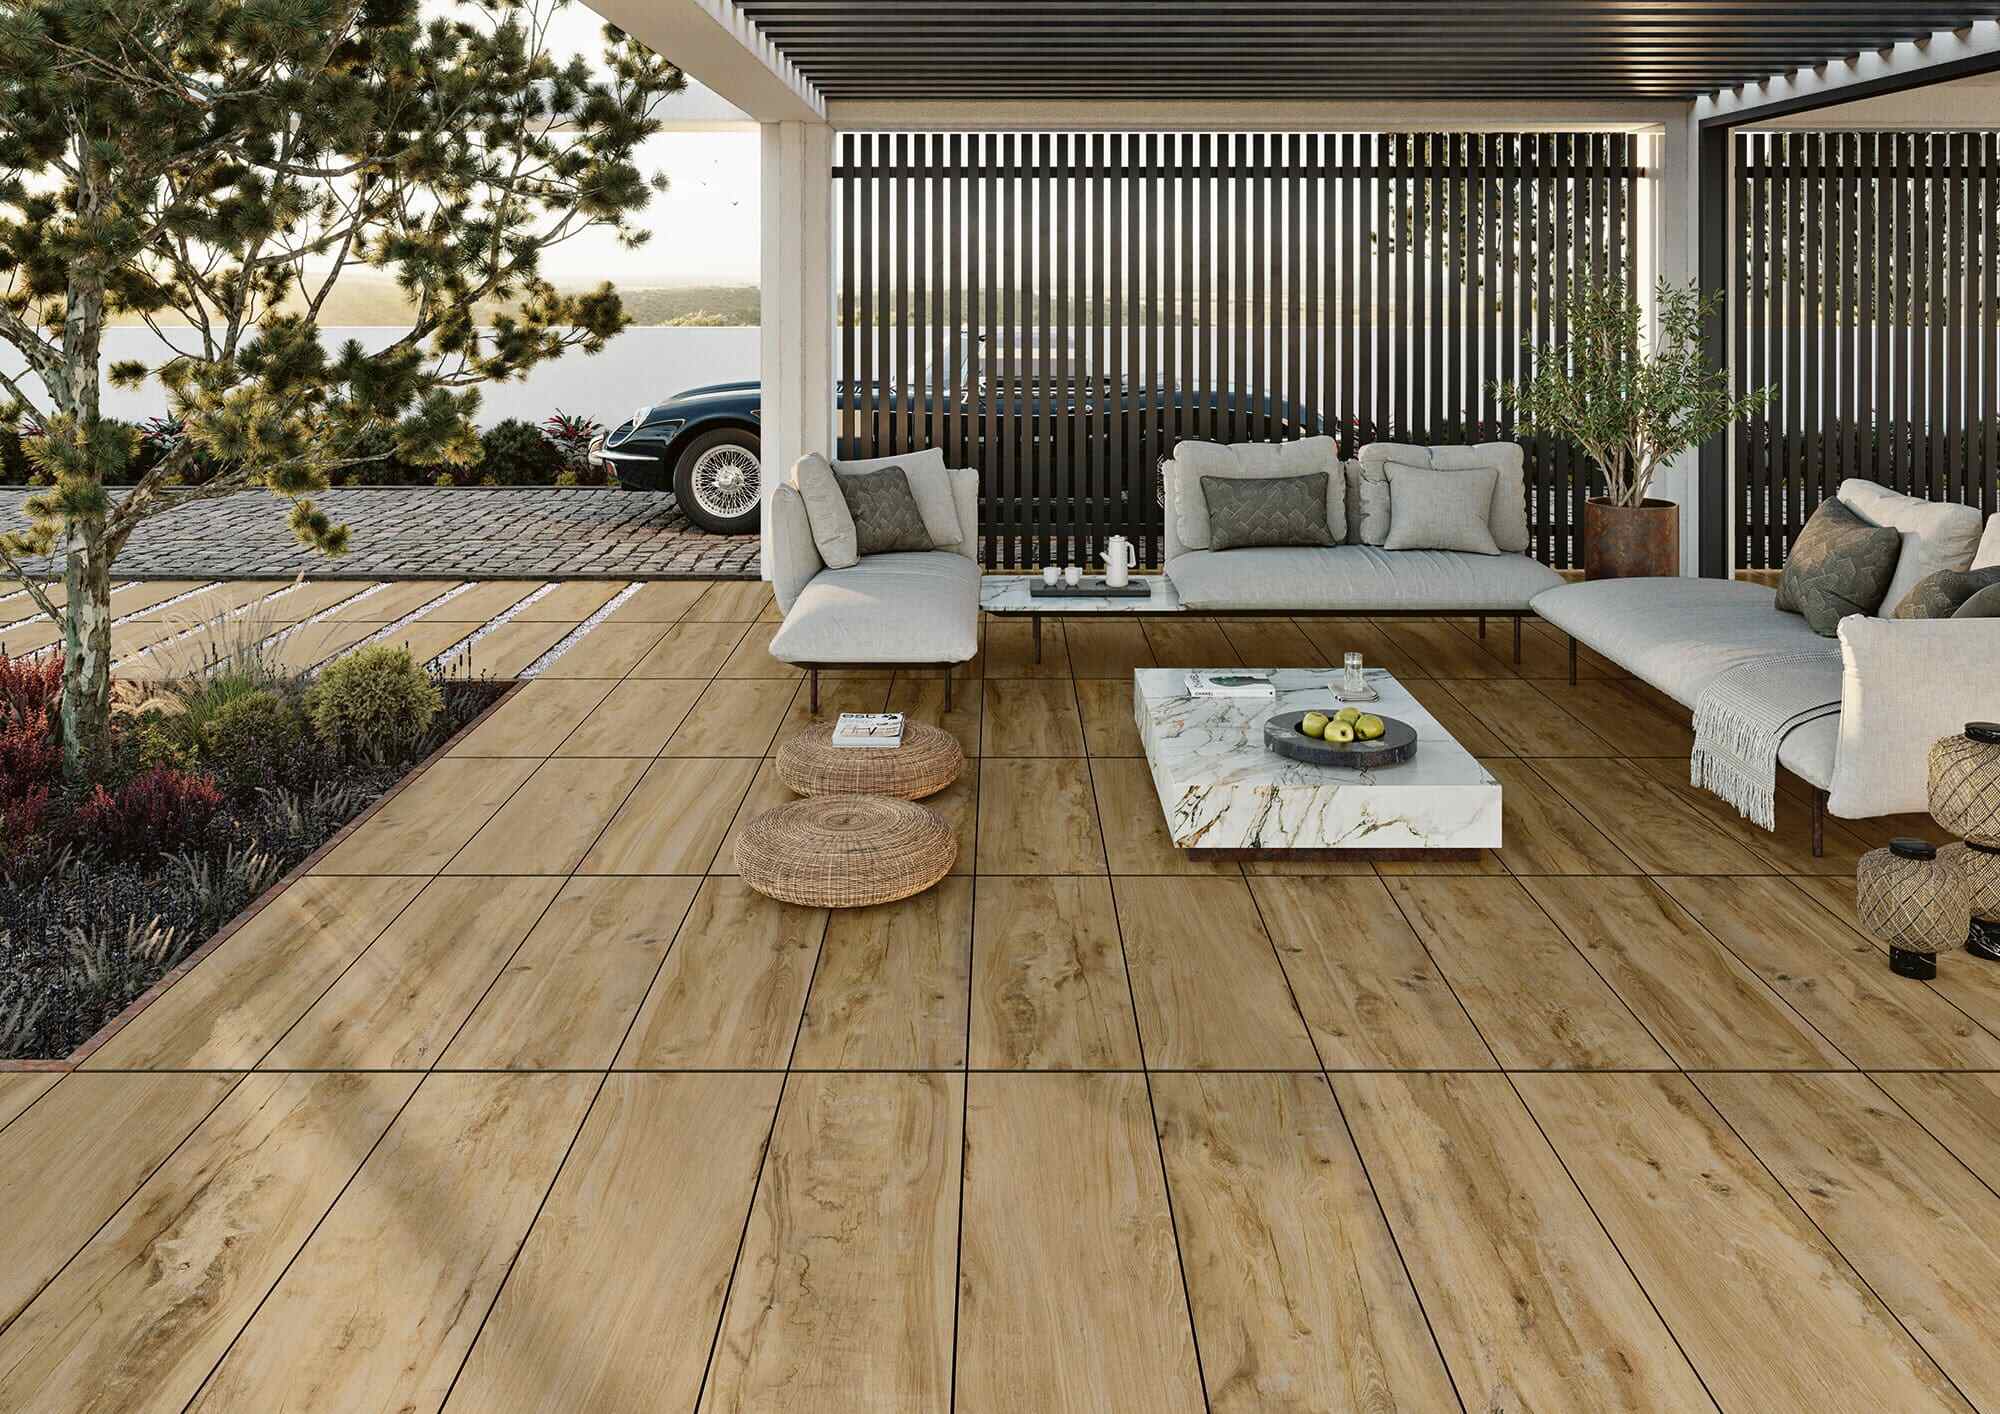 What Is The Best Flooring For A Patio